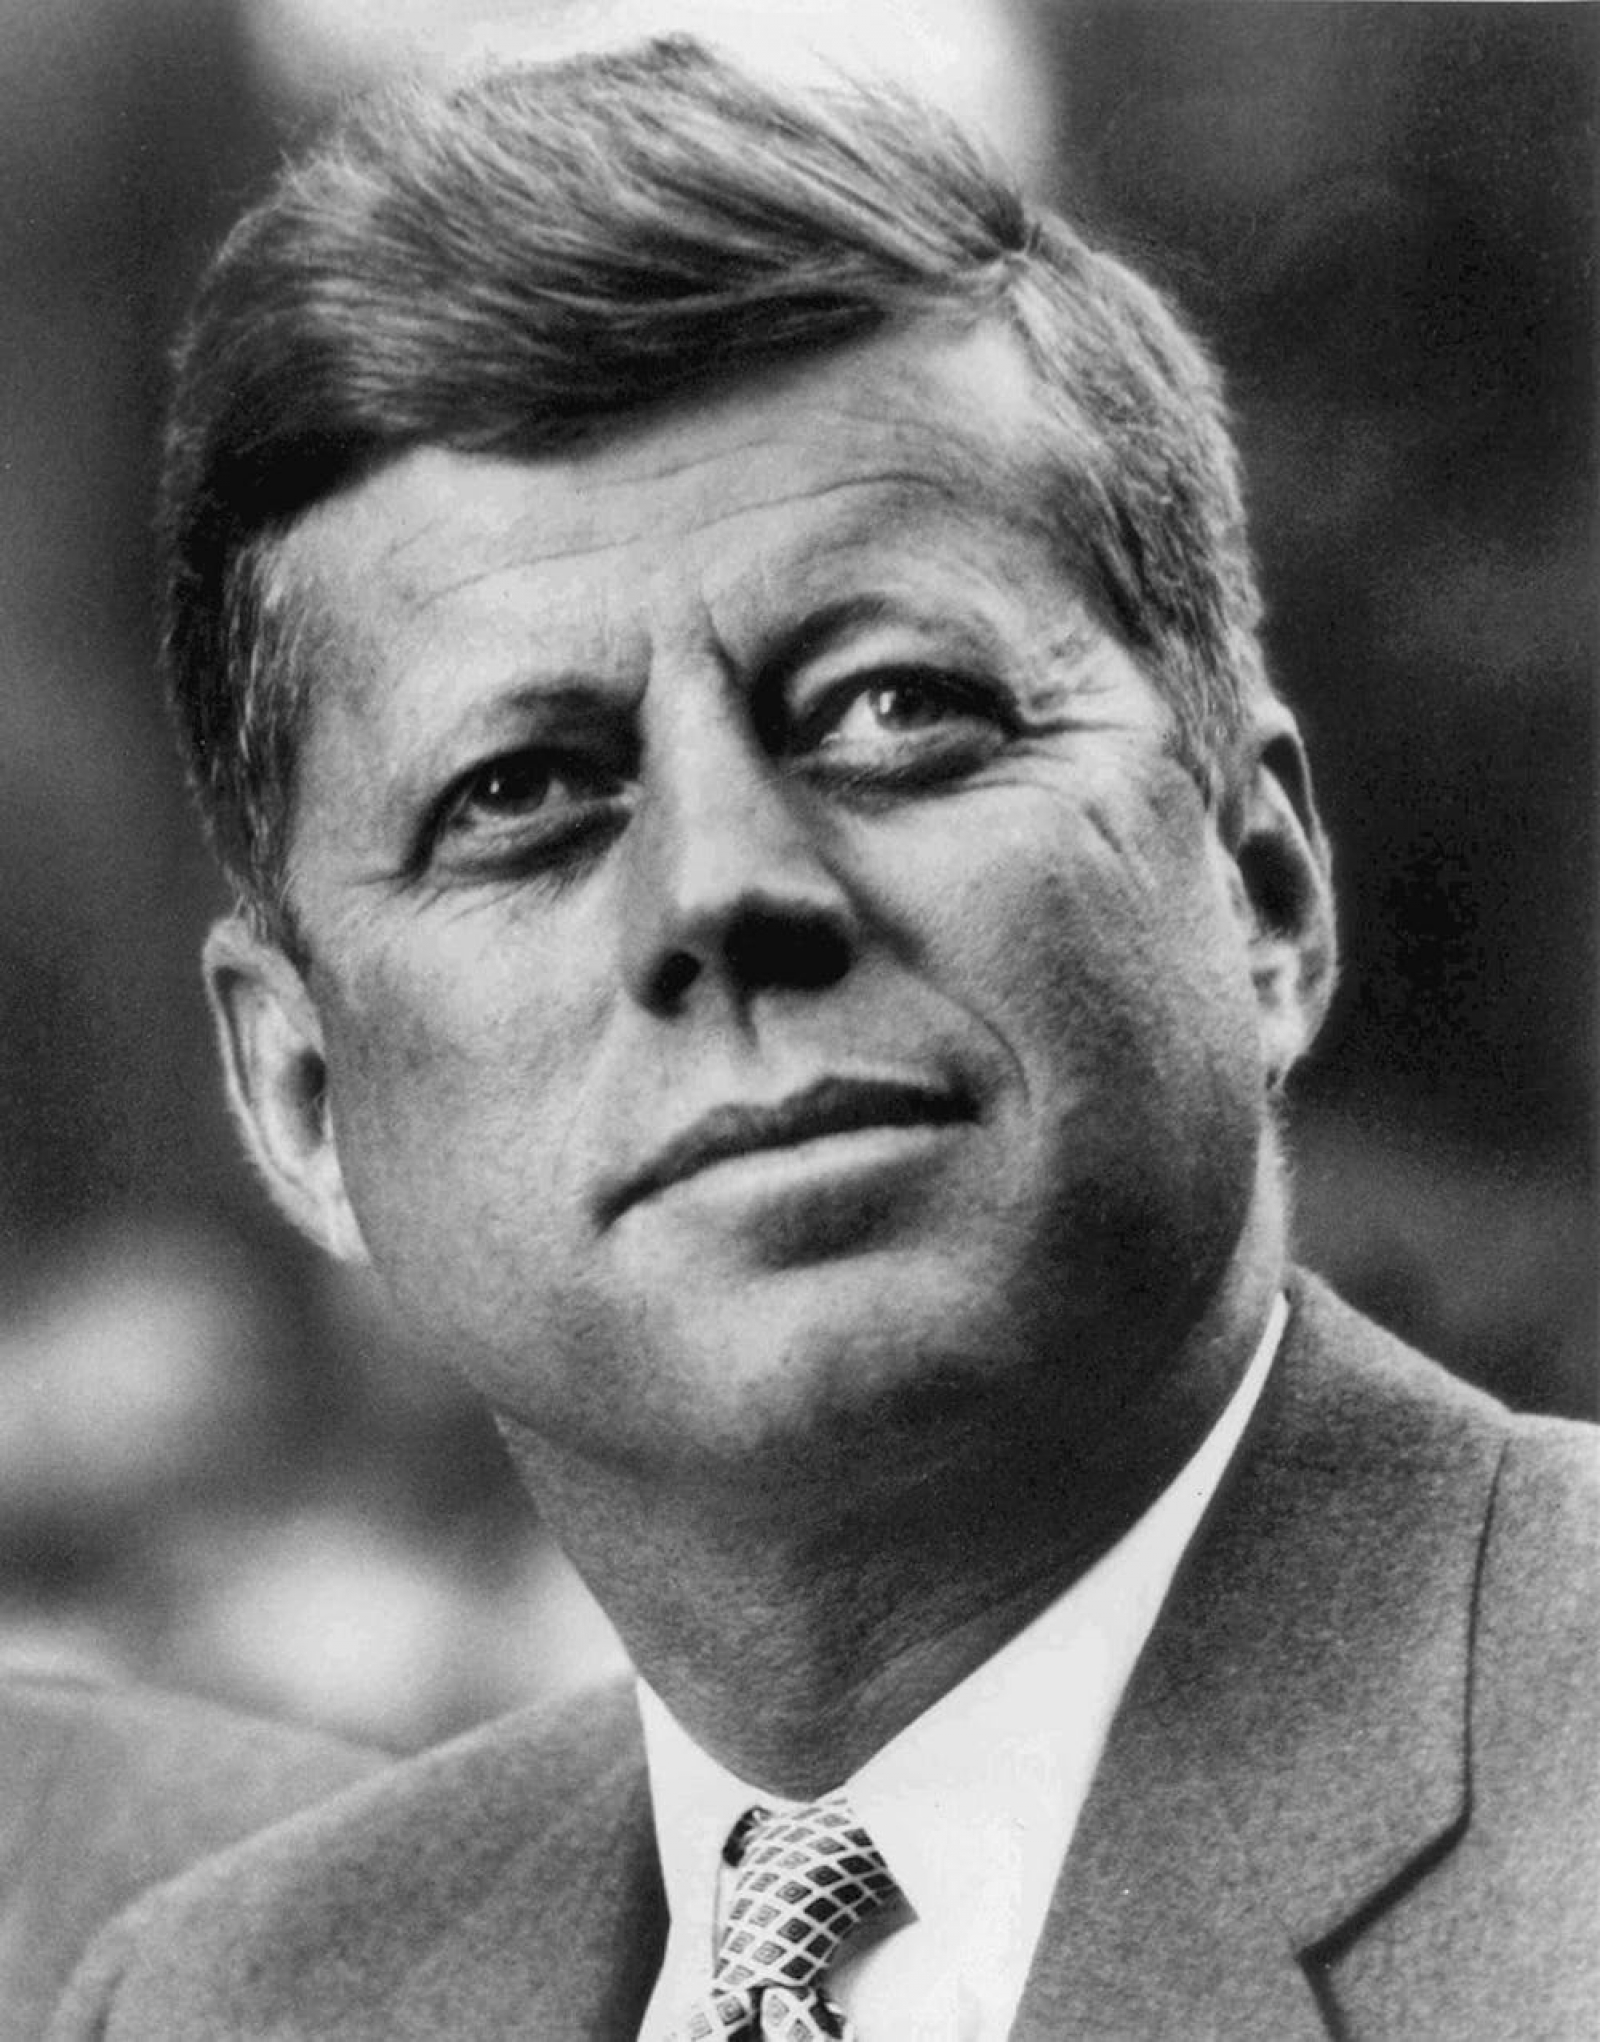 The Execution of JFK: Extremism in Defense of Liberty